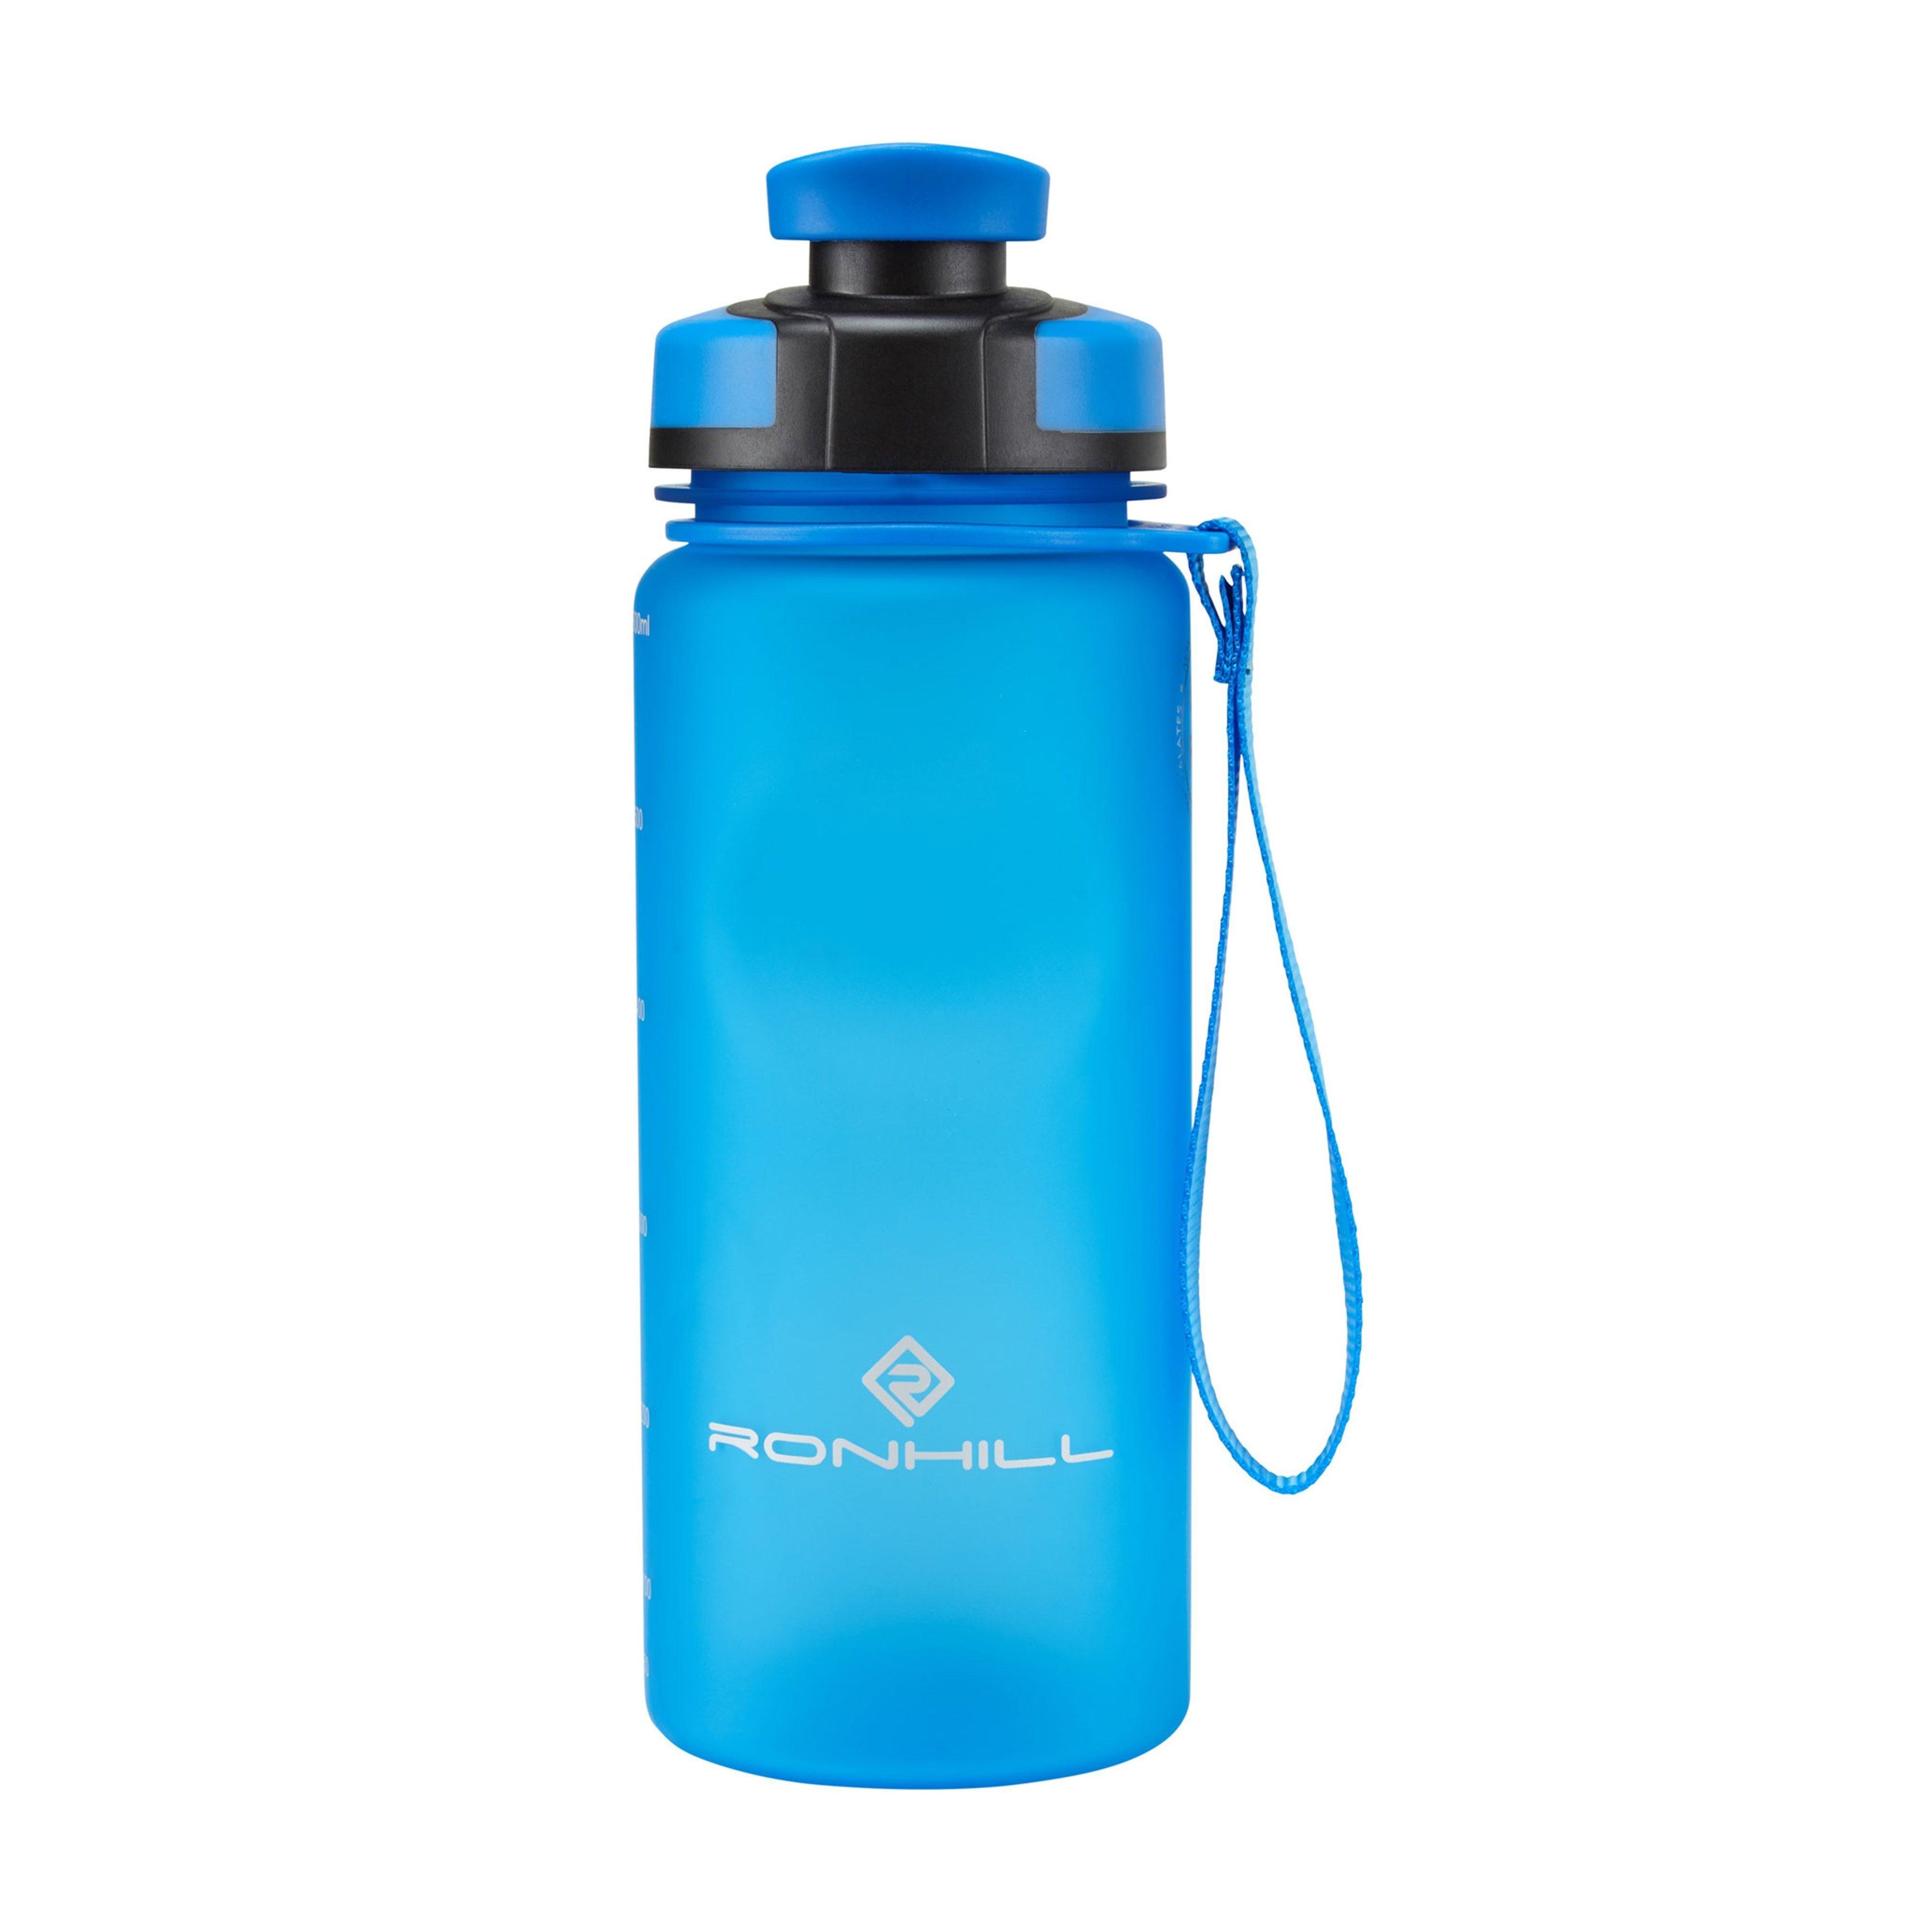 Ronhill Hydration Bottle Review